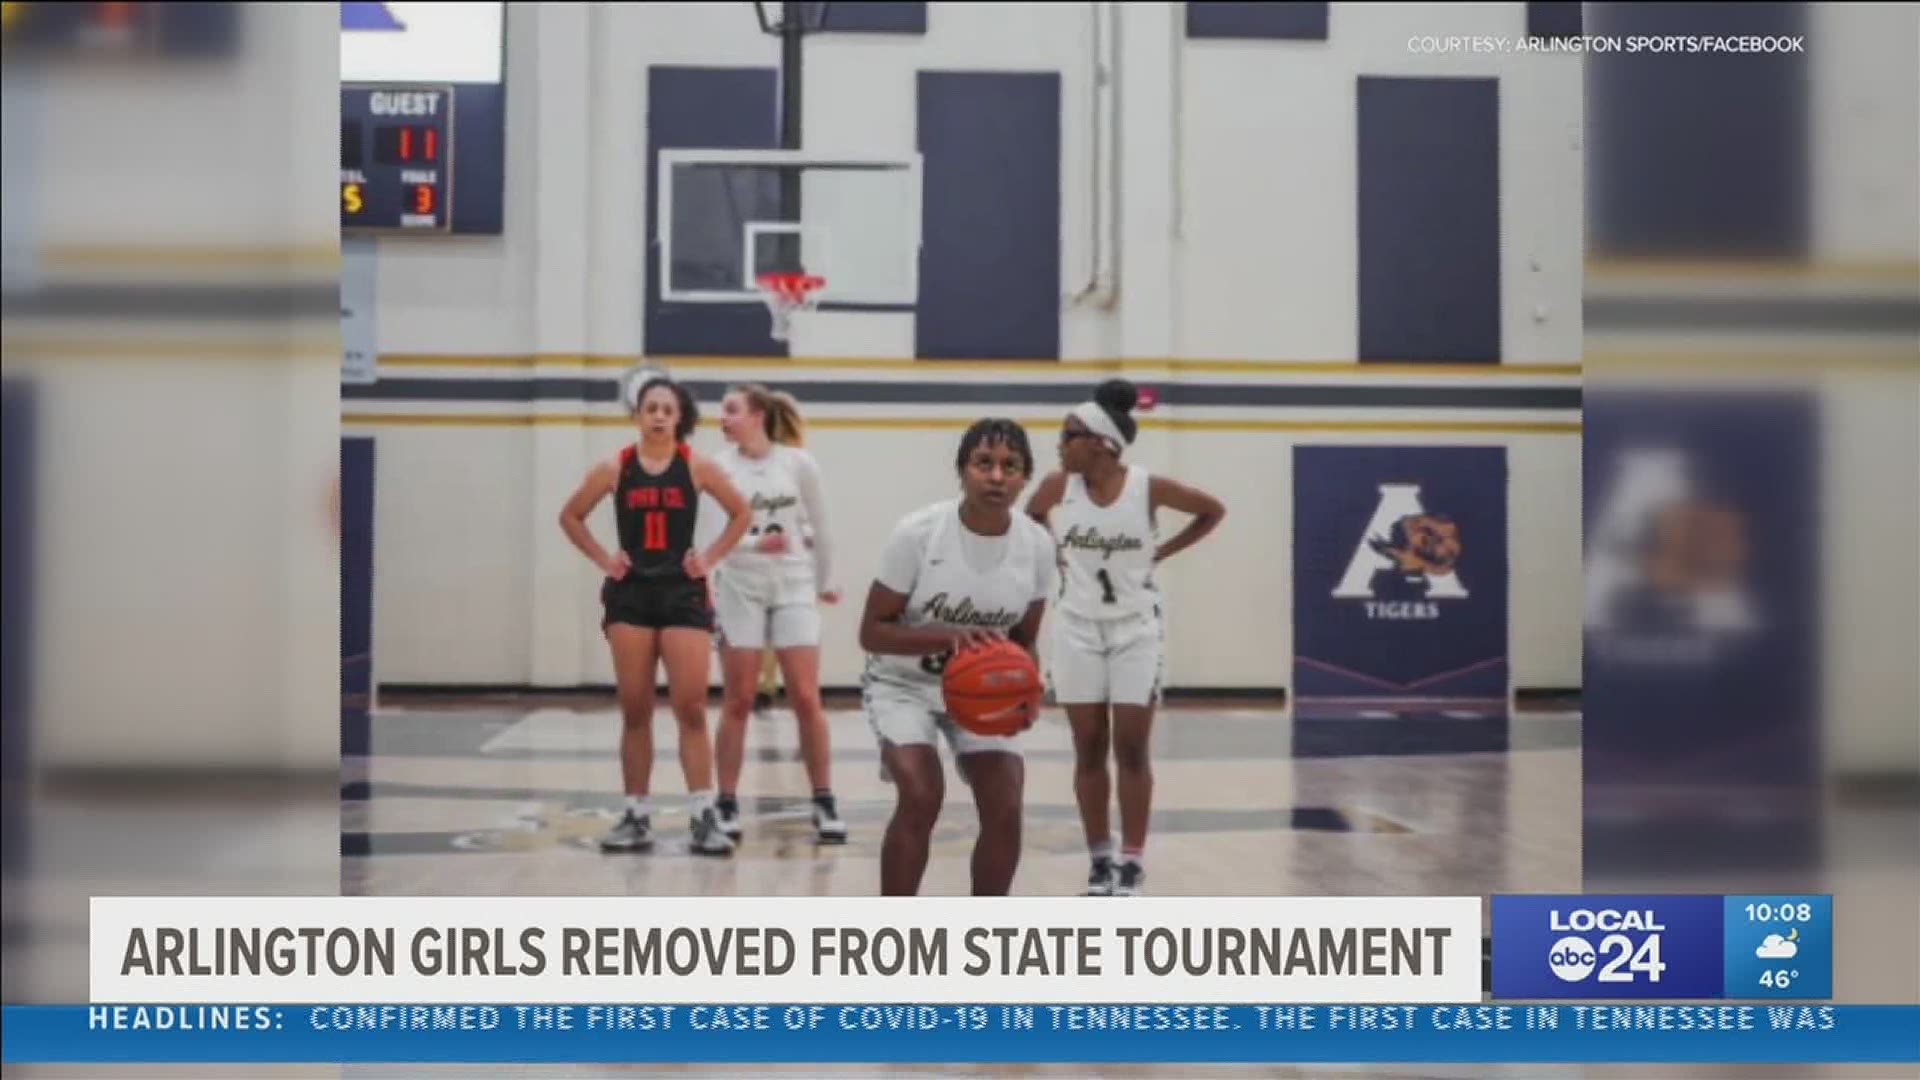 The altercation resulted in TSSAA pulling Arlington girl's basketball team from the state tournament.